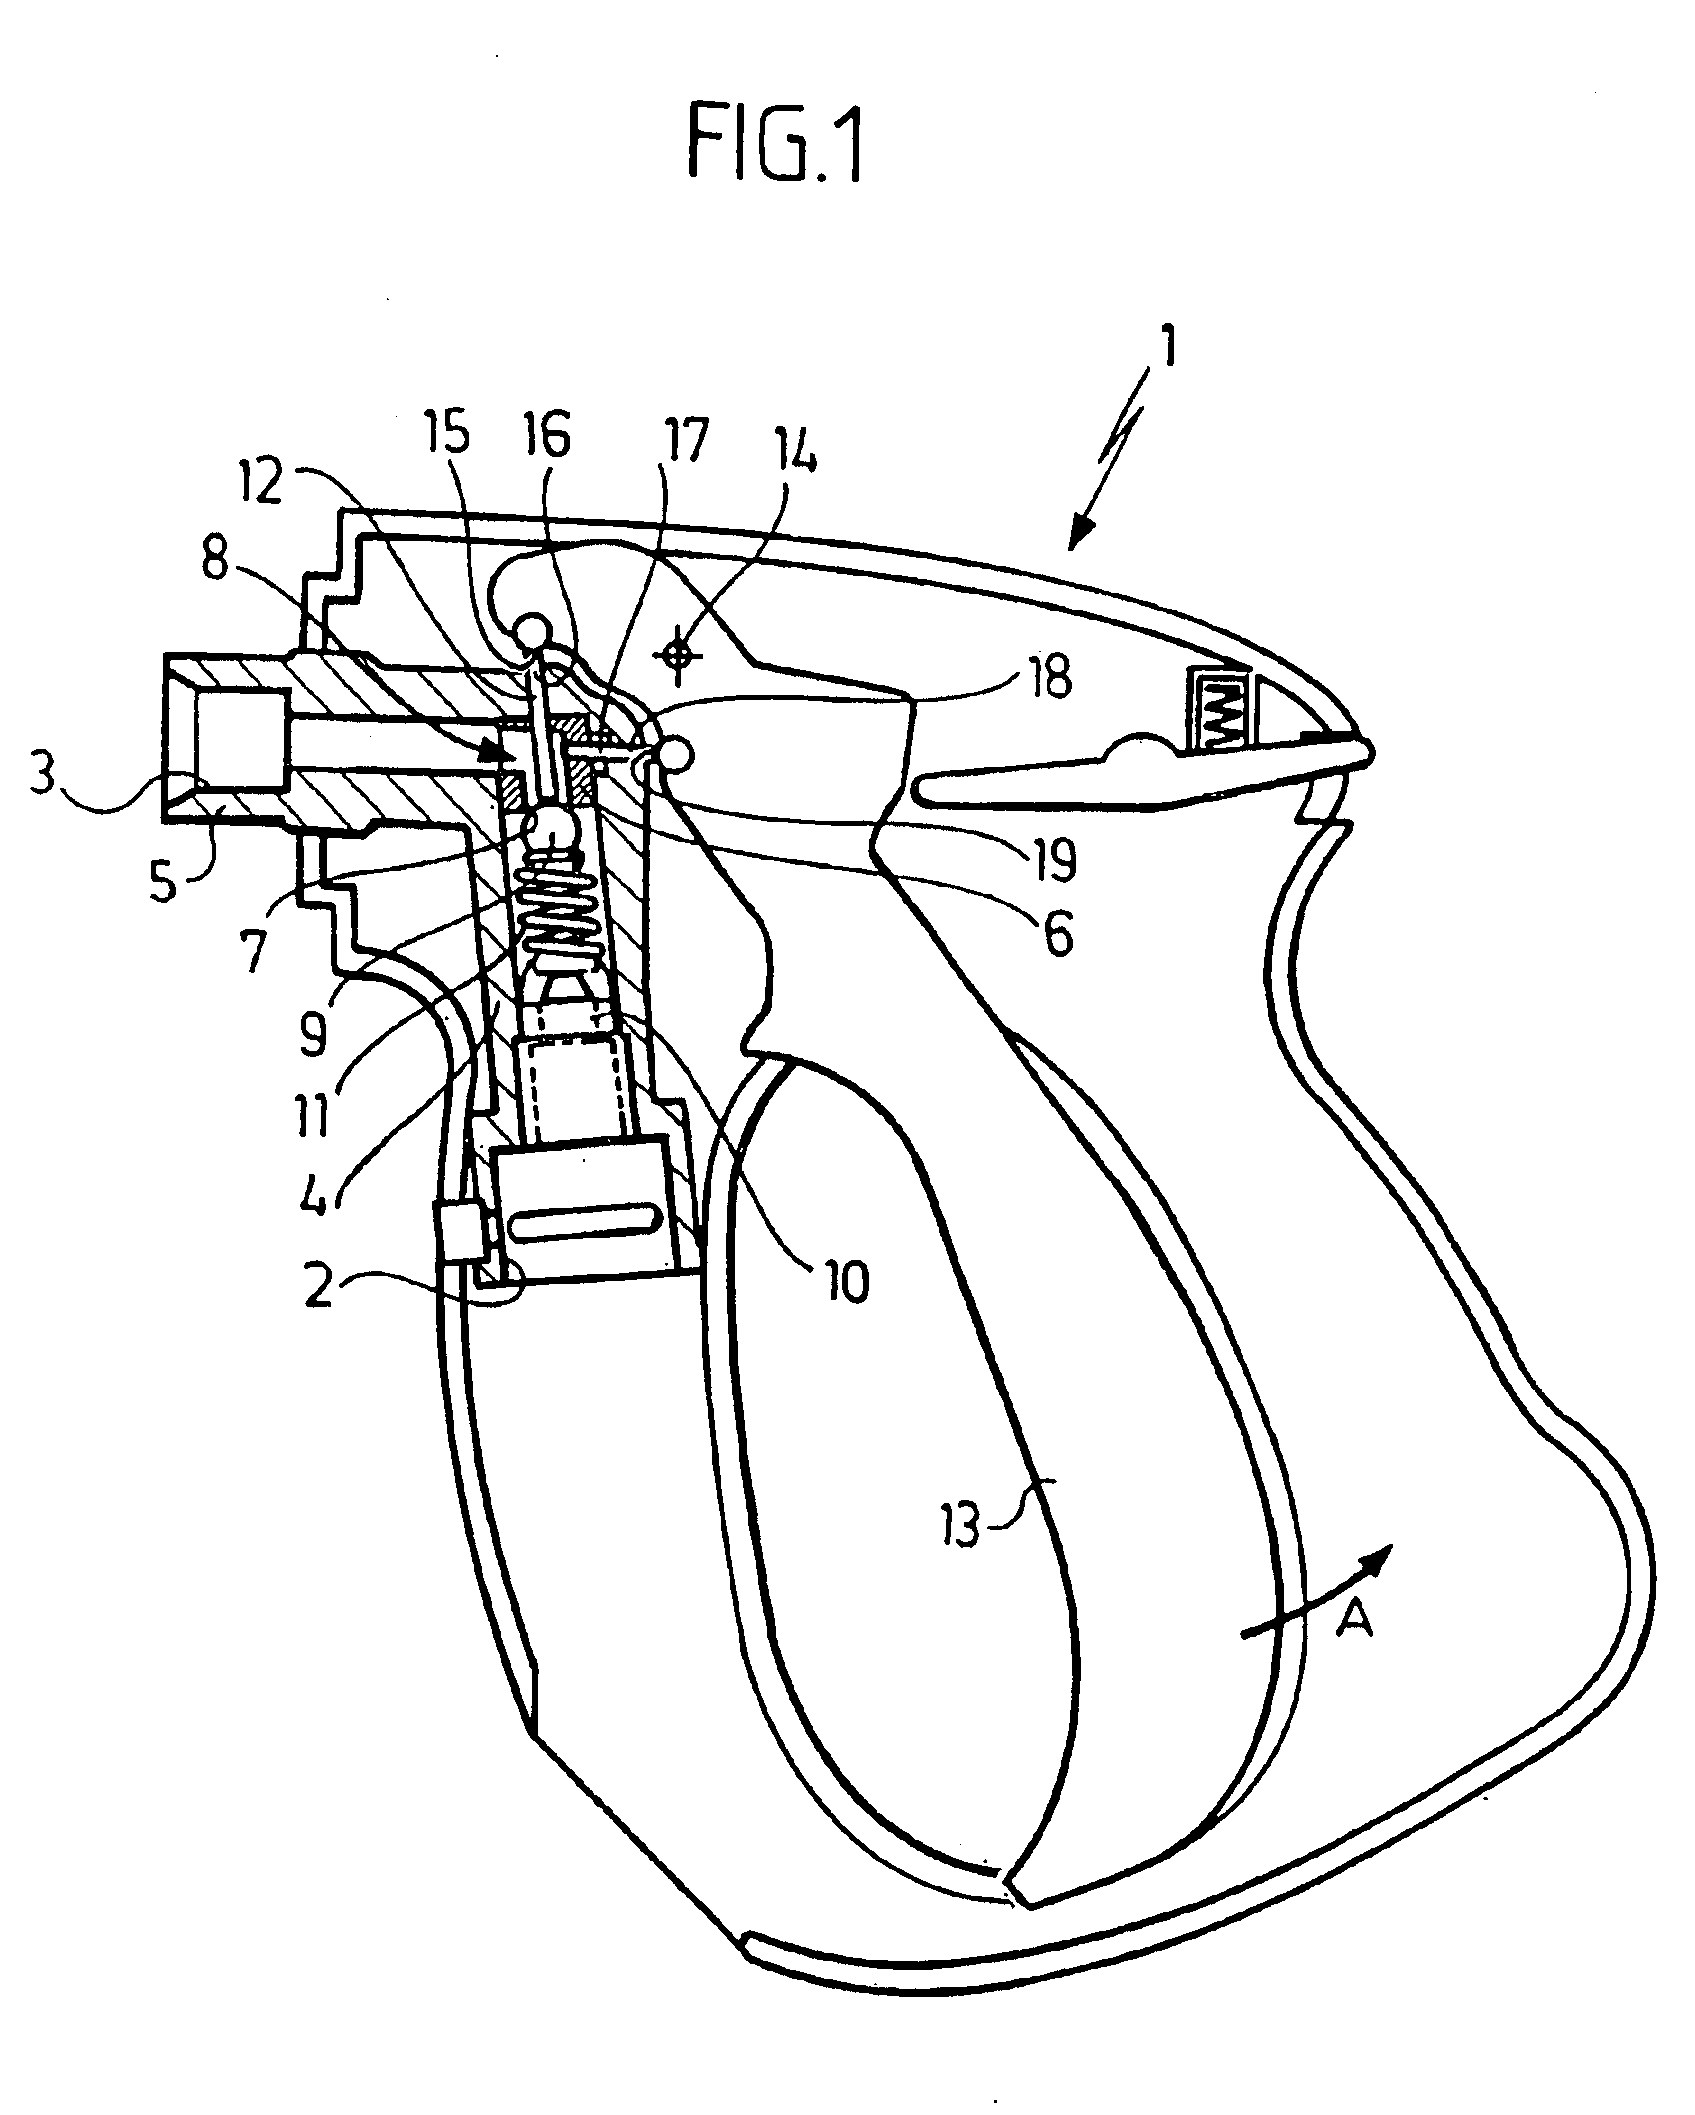 Closure device for the fluid delivery line of a high-pressure cleaning apparatus